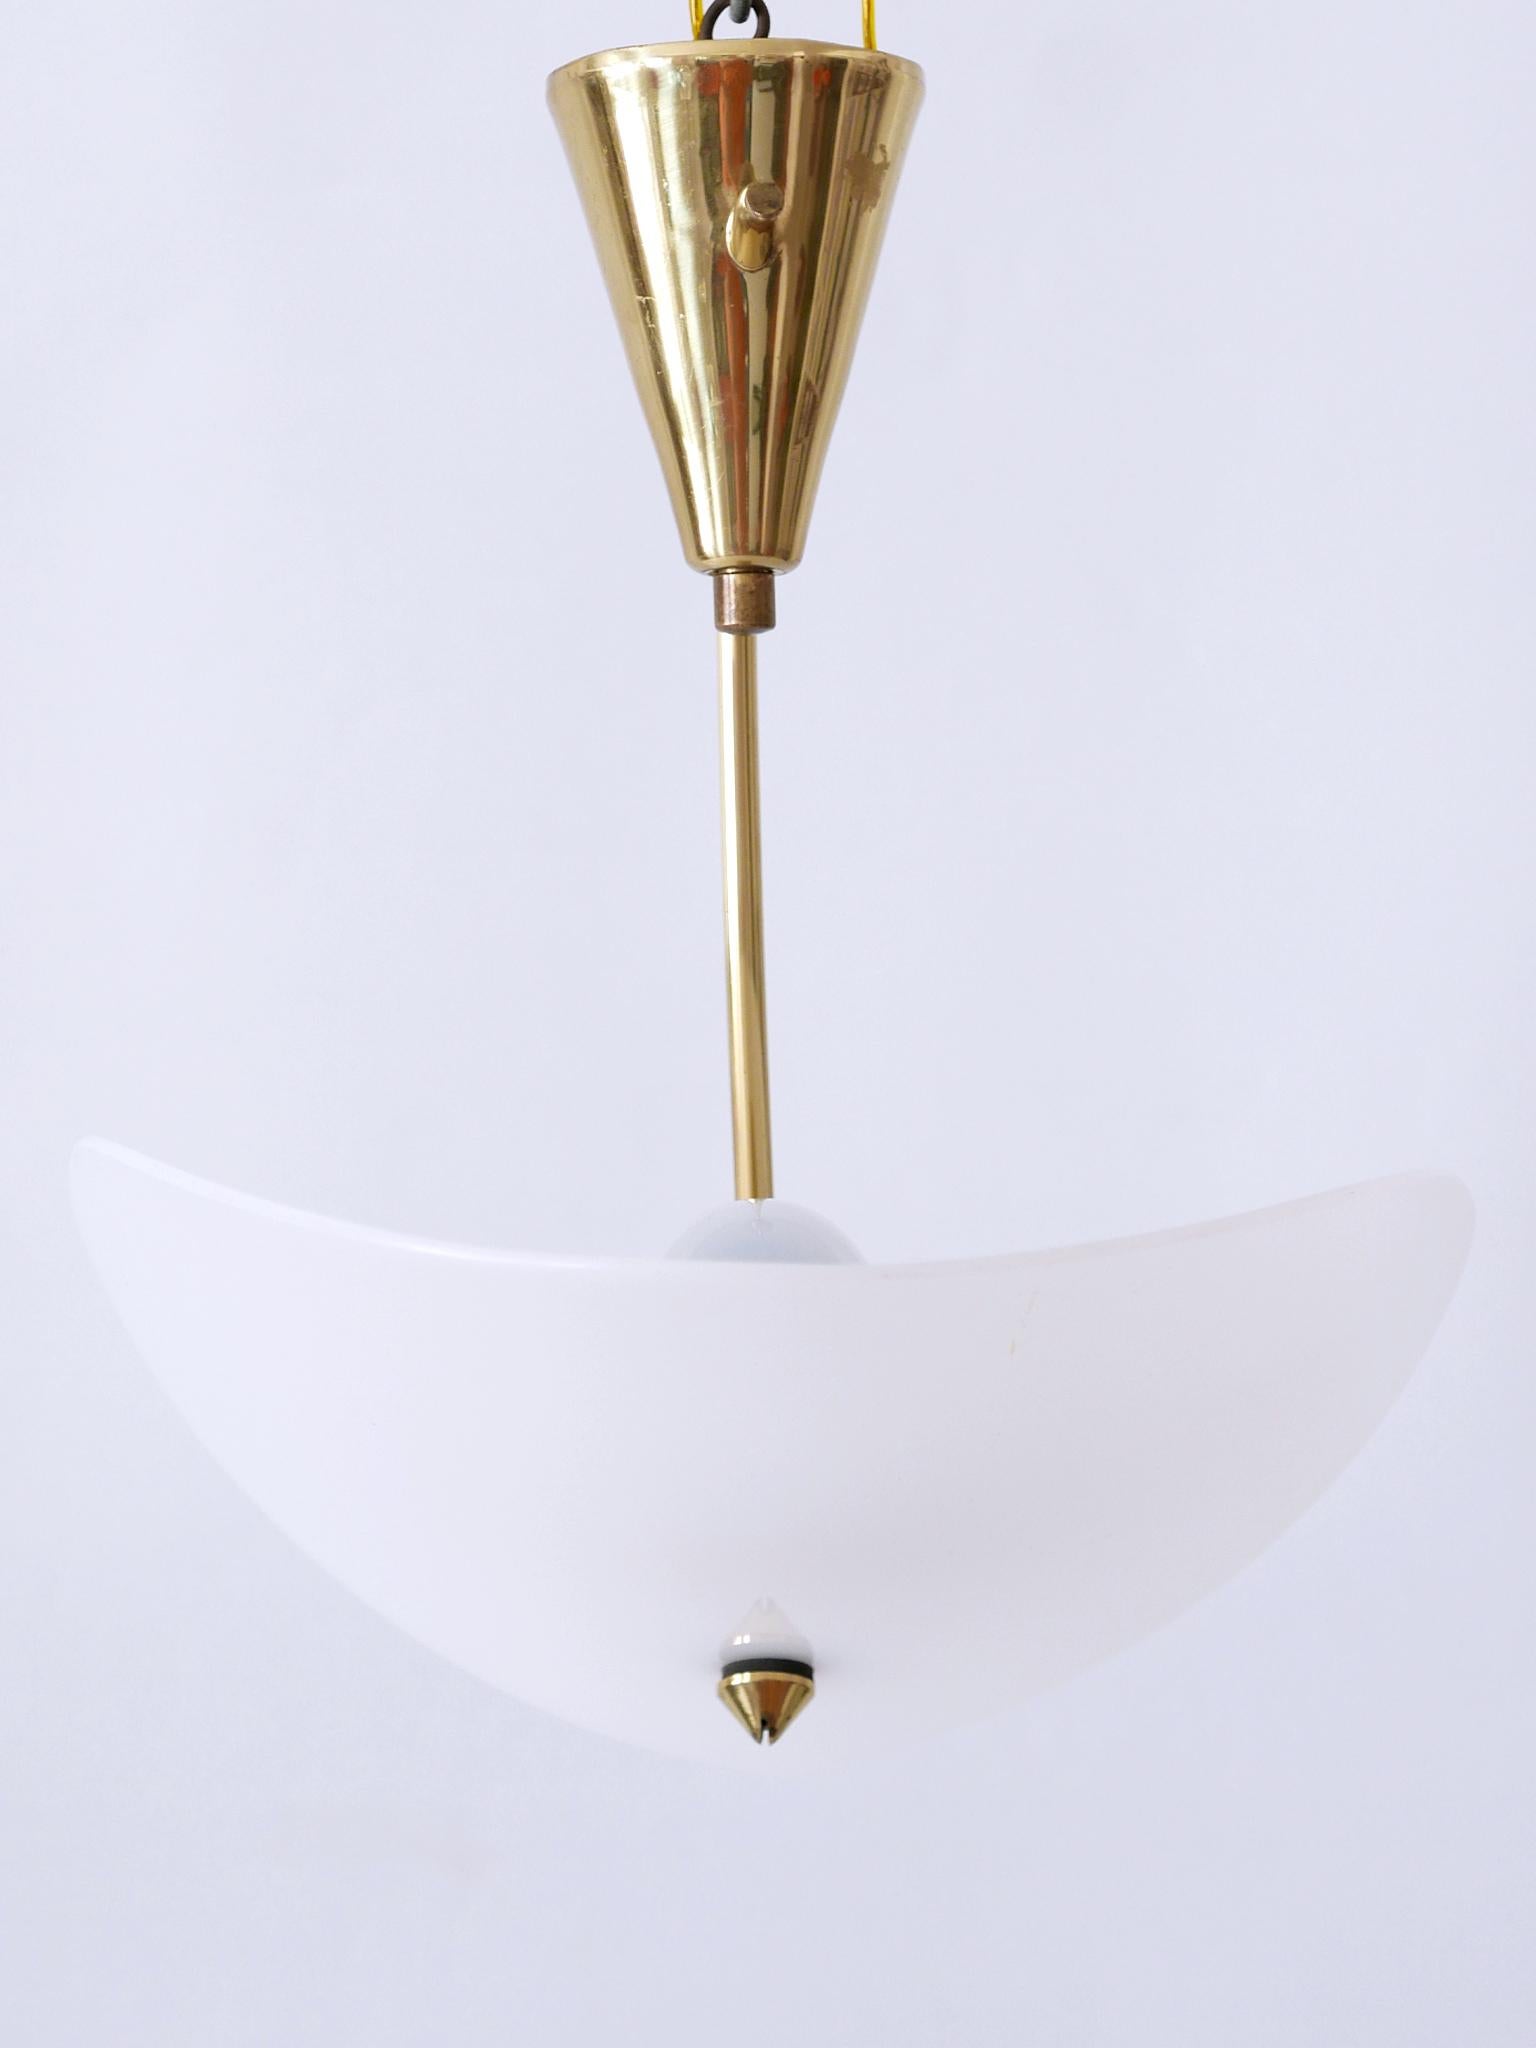 Extremely Rare and Elegant Lucite & Brass Ceiling Lamp Germany 1960s For Sale 3